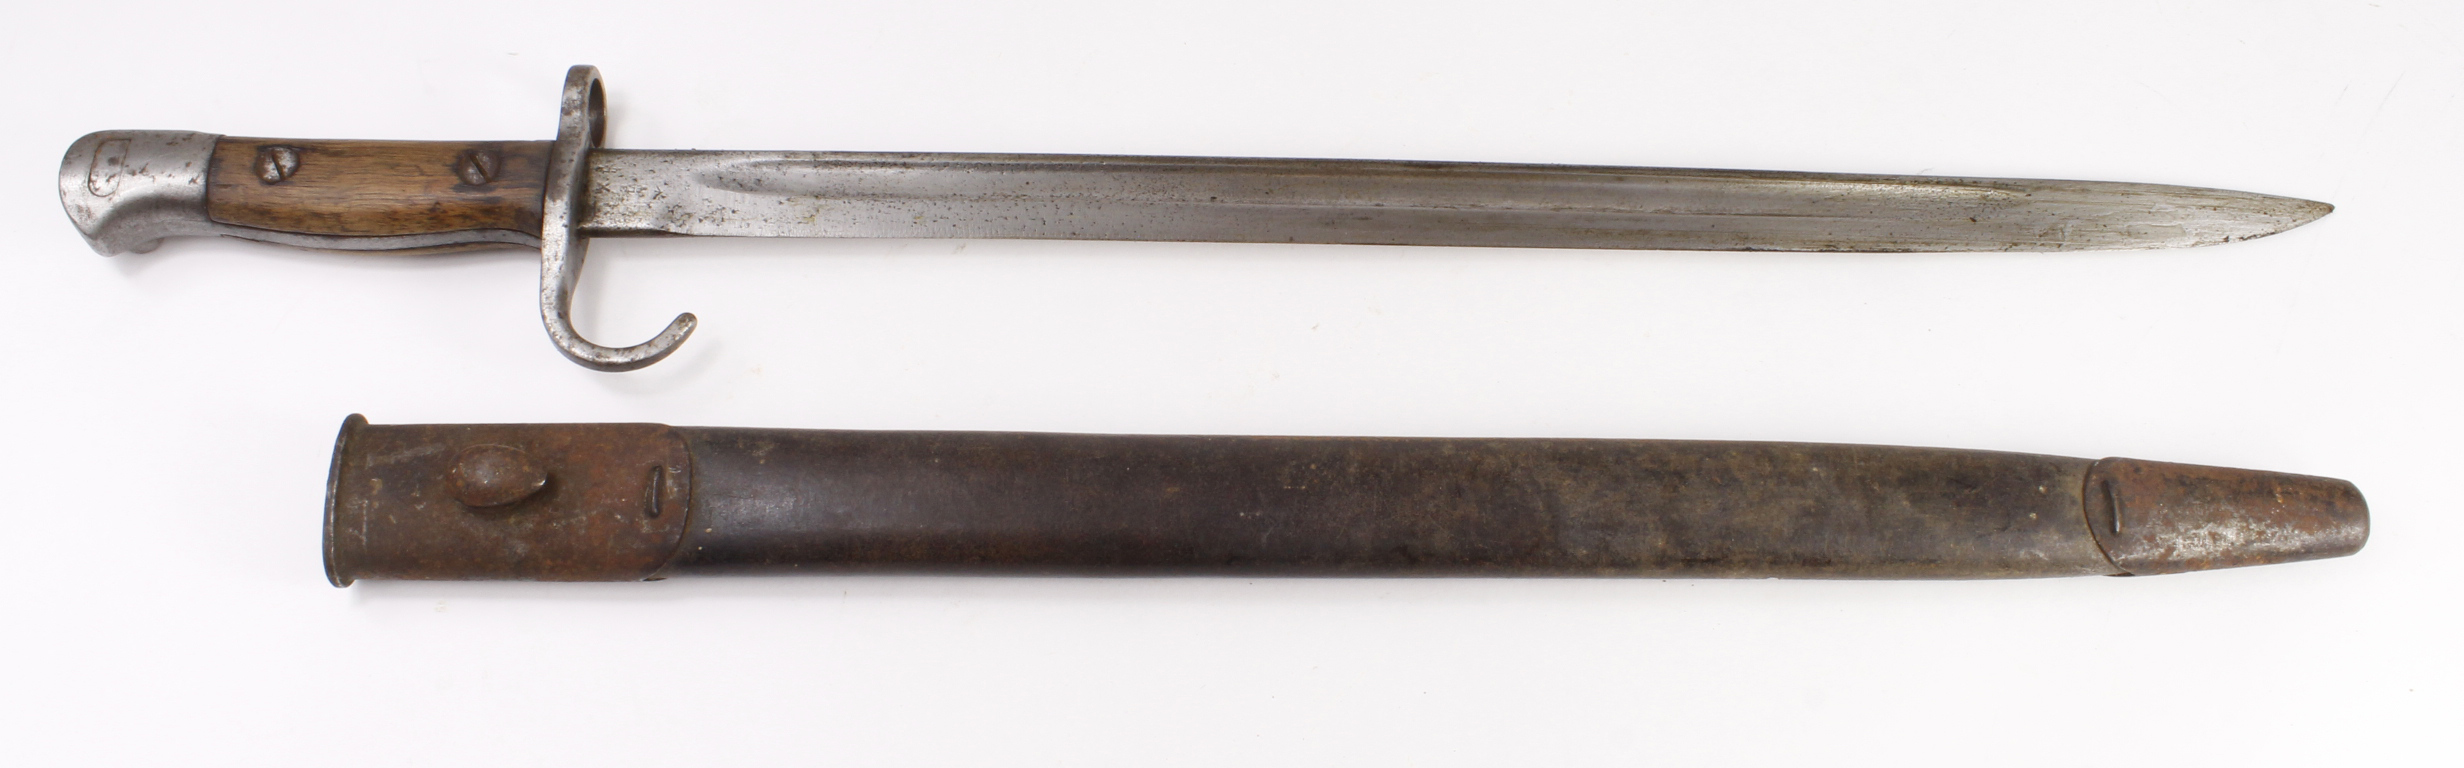 Bayonet 1907 pattern Hook Quilon dated 1911 and made by Enfield.